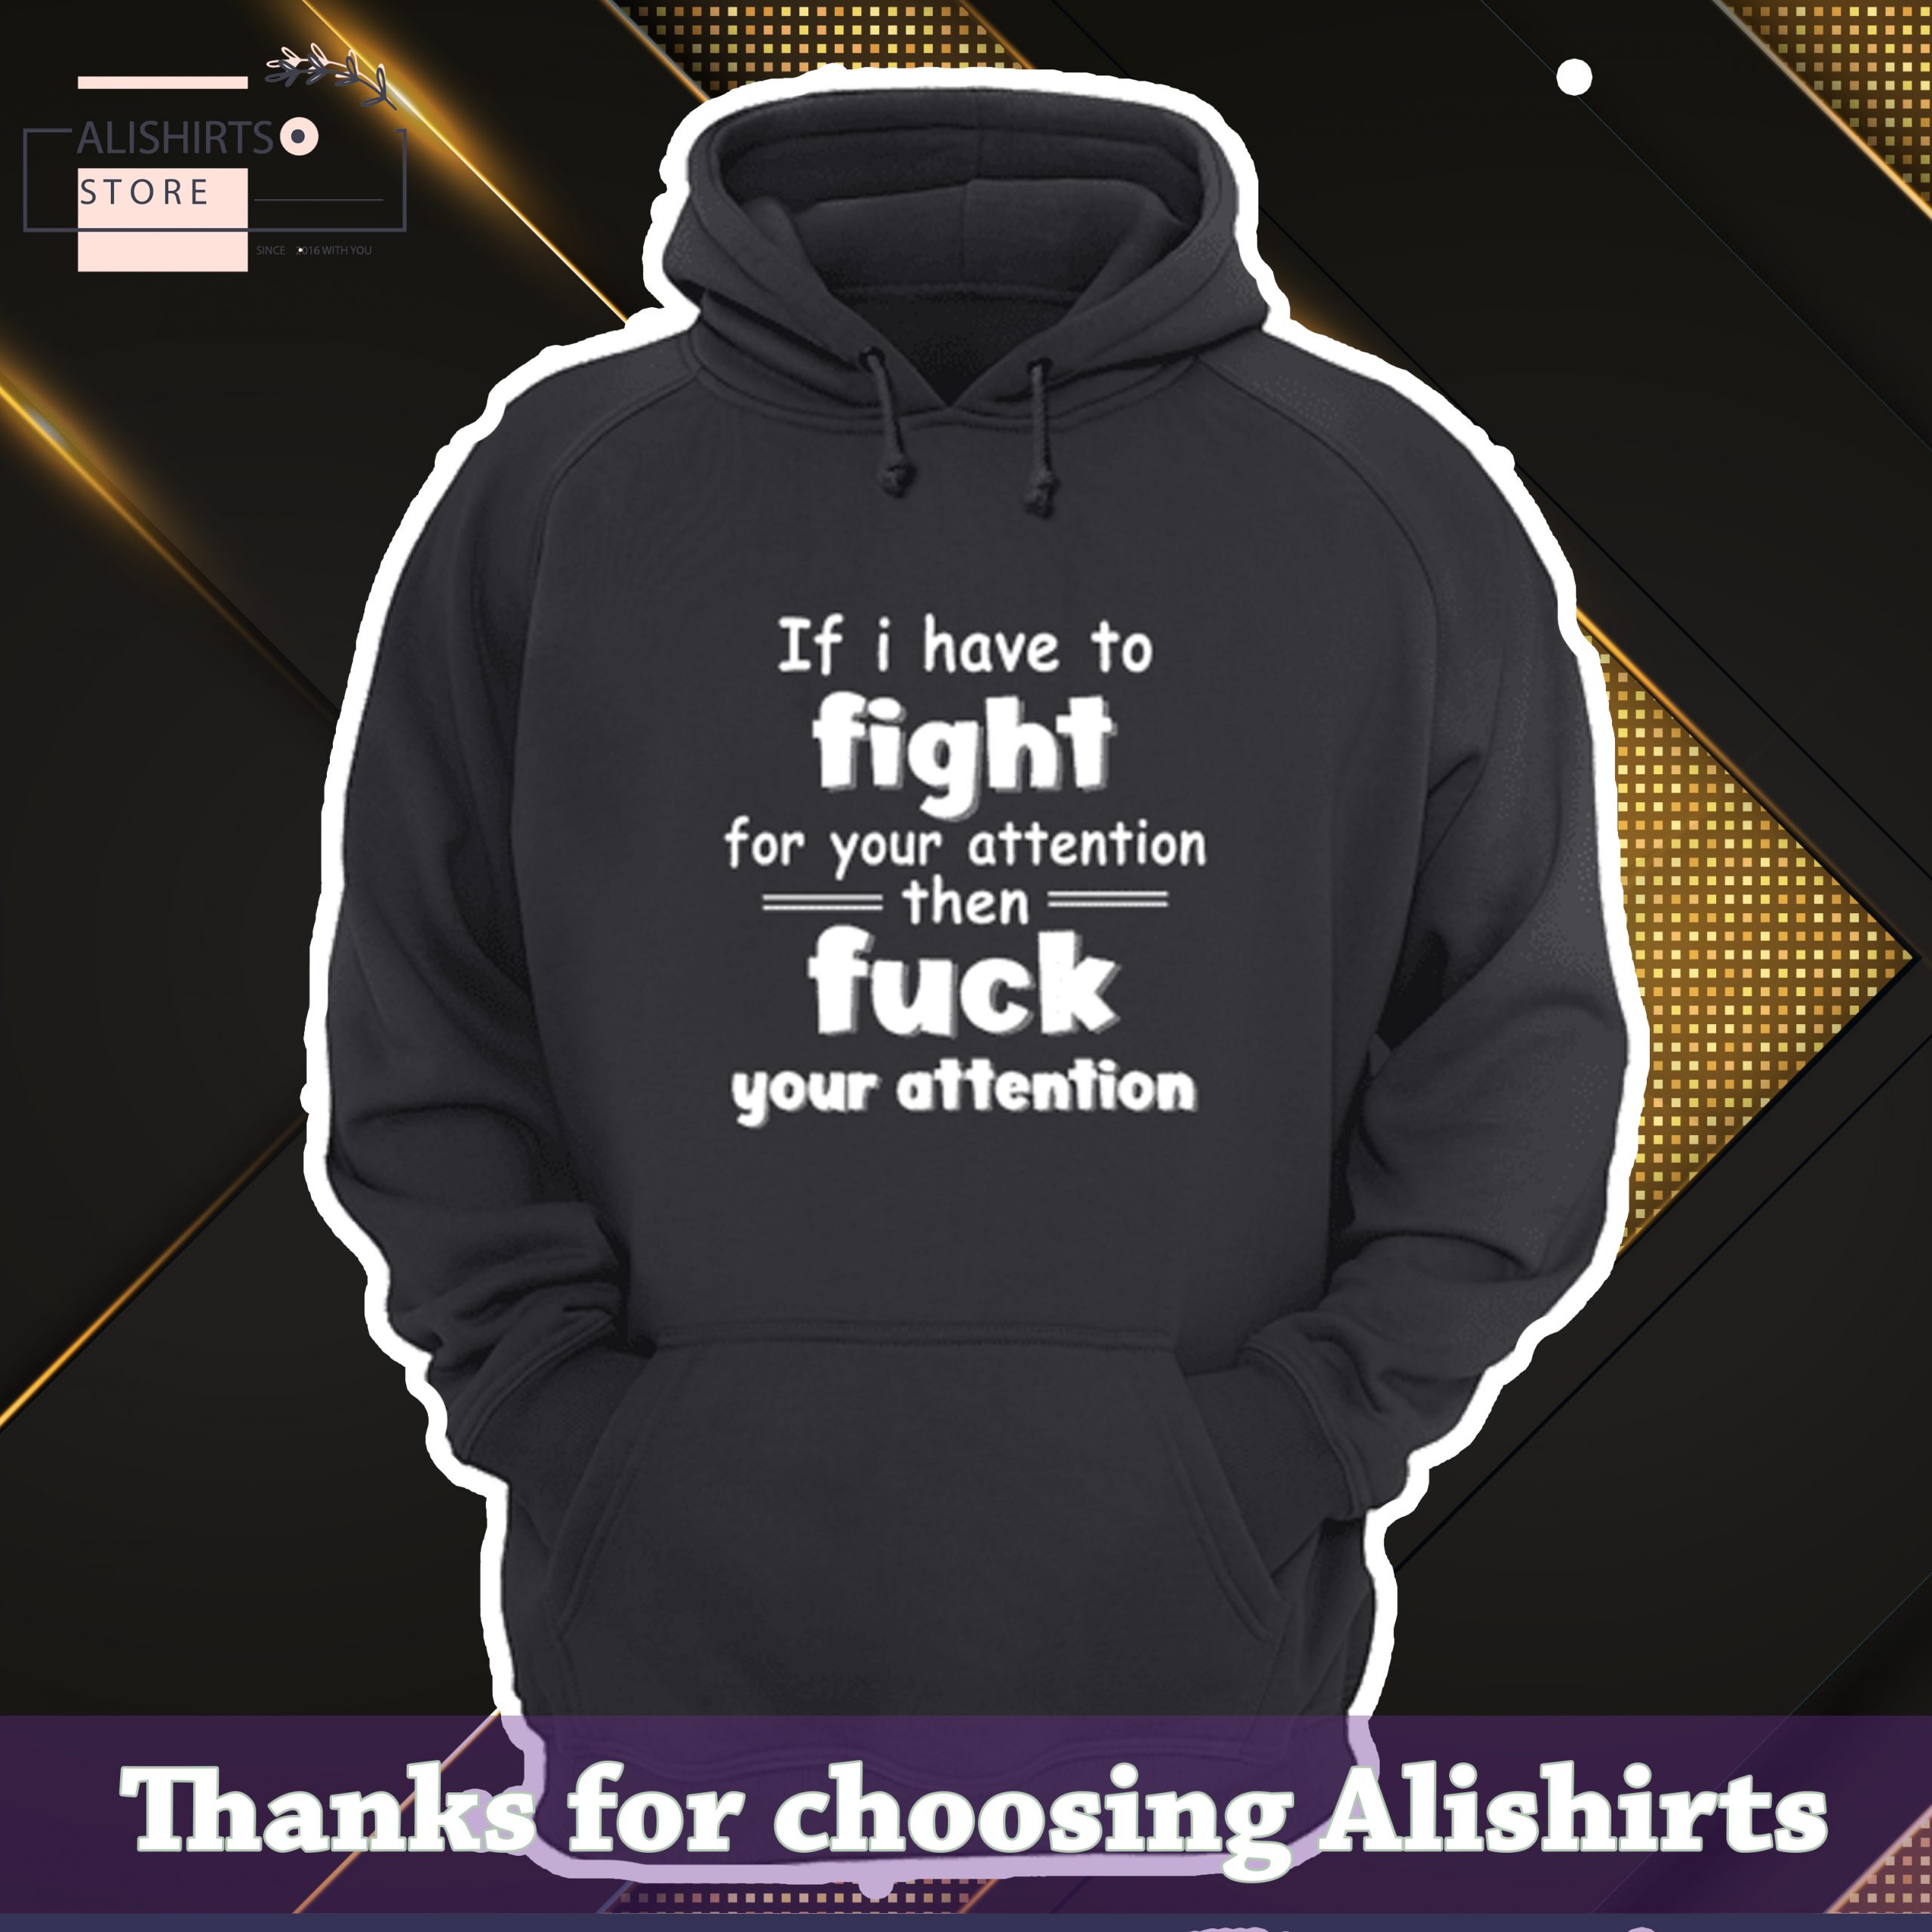 If I have to fight for your attention, then fuck your attention shirt, hoodie, tank top